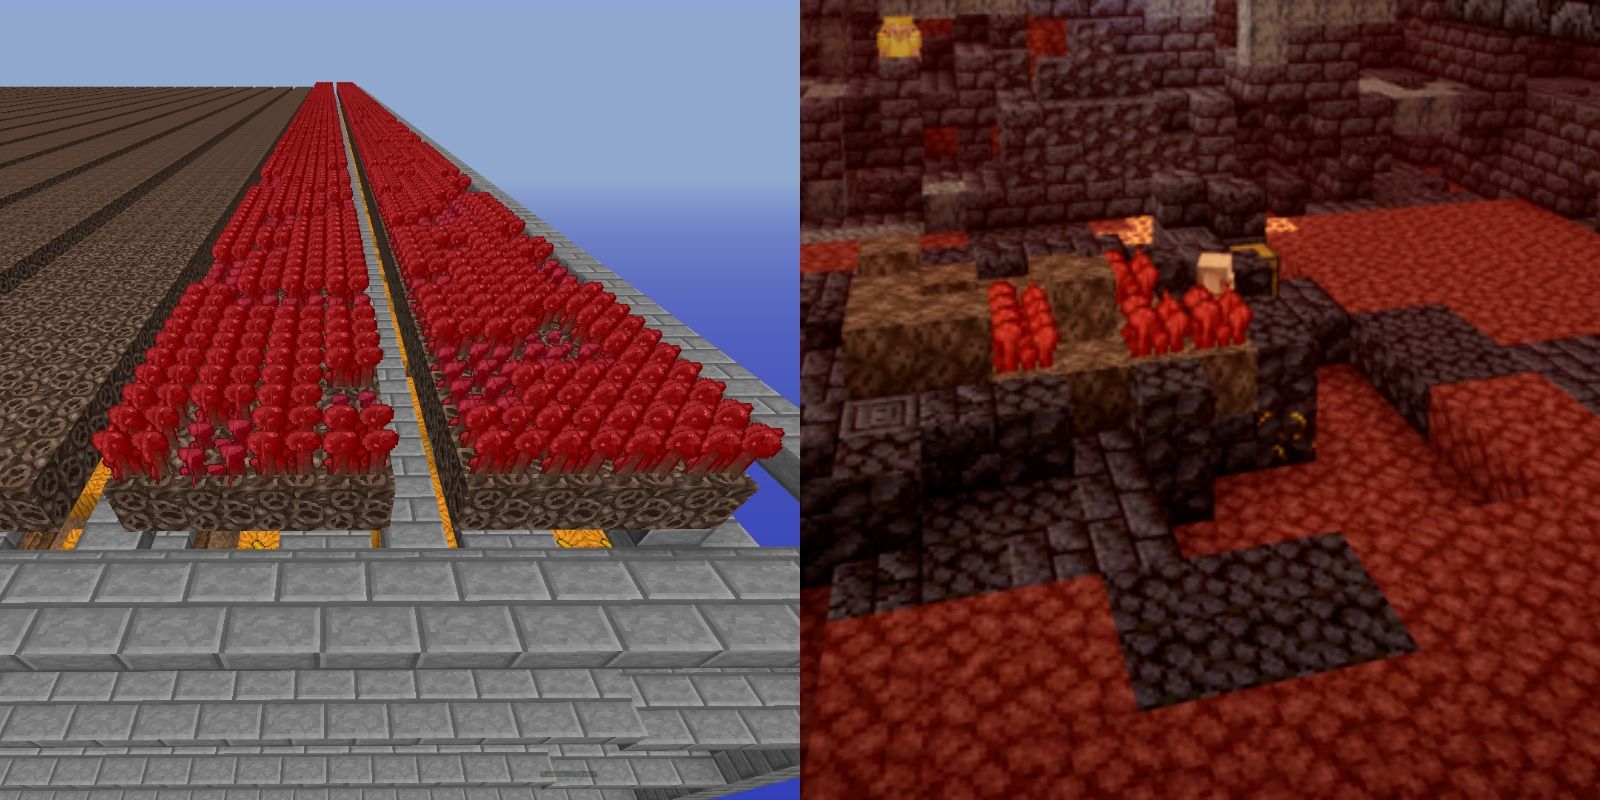 How to find and loot a Minecraft Nether Fortress